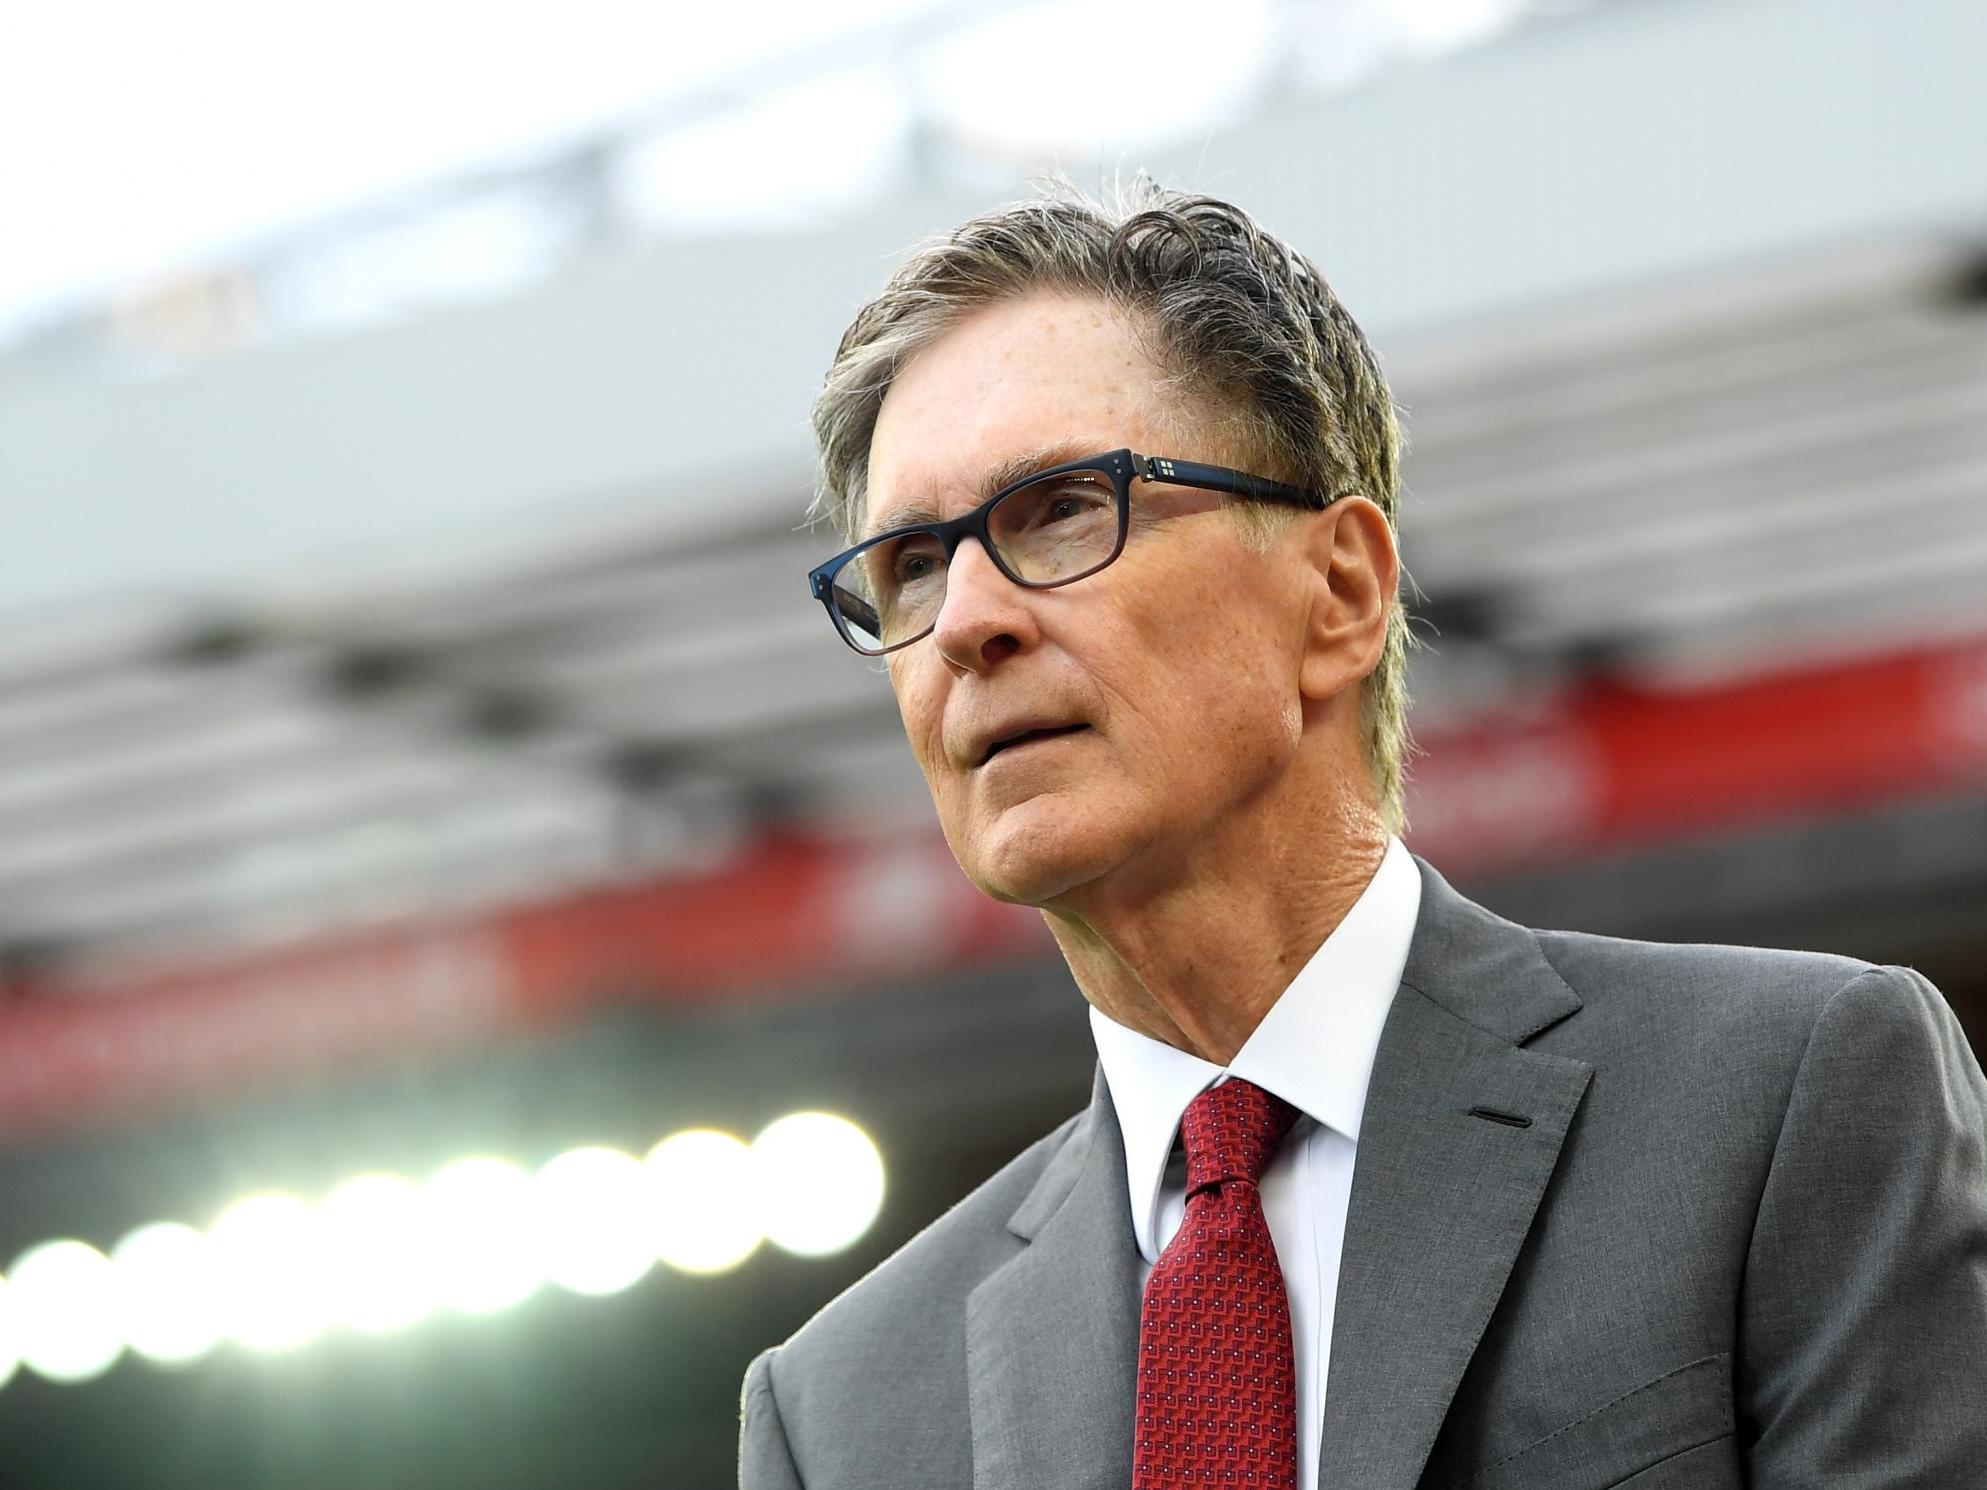 FSG will rightly receive criticism for the hyposcrisy of their move to furlough staff